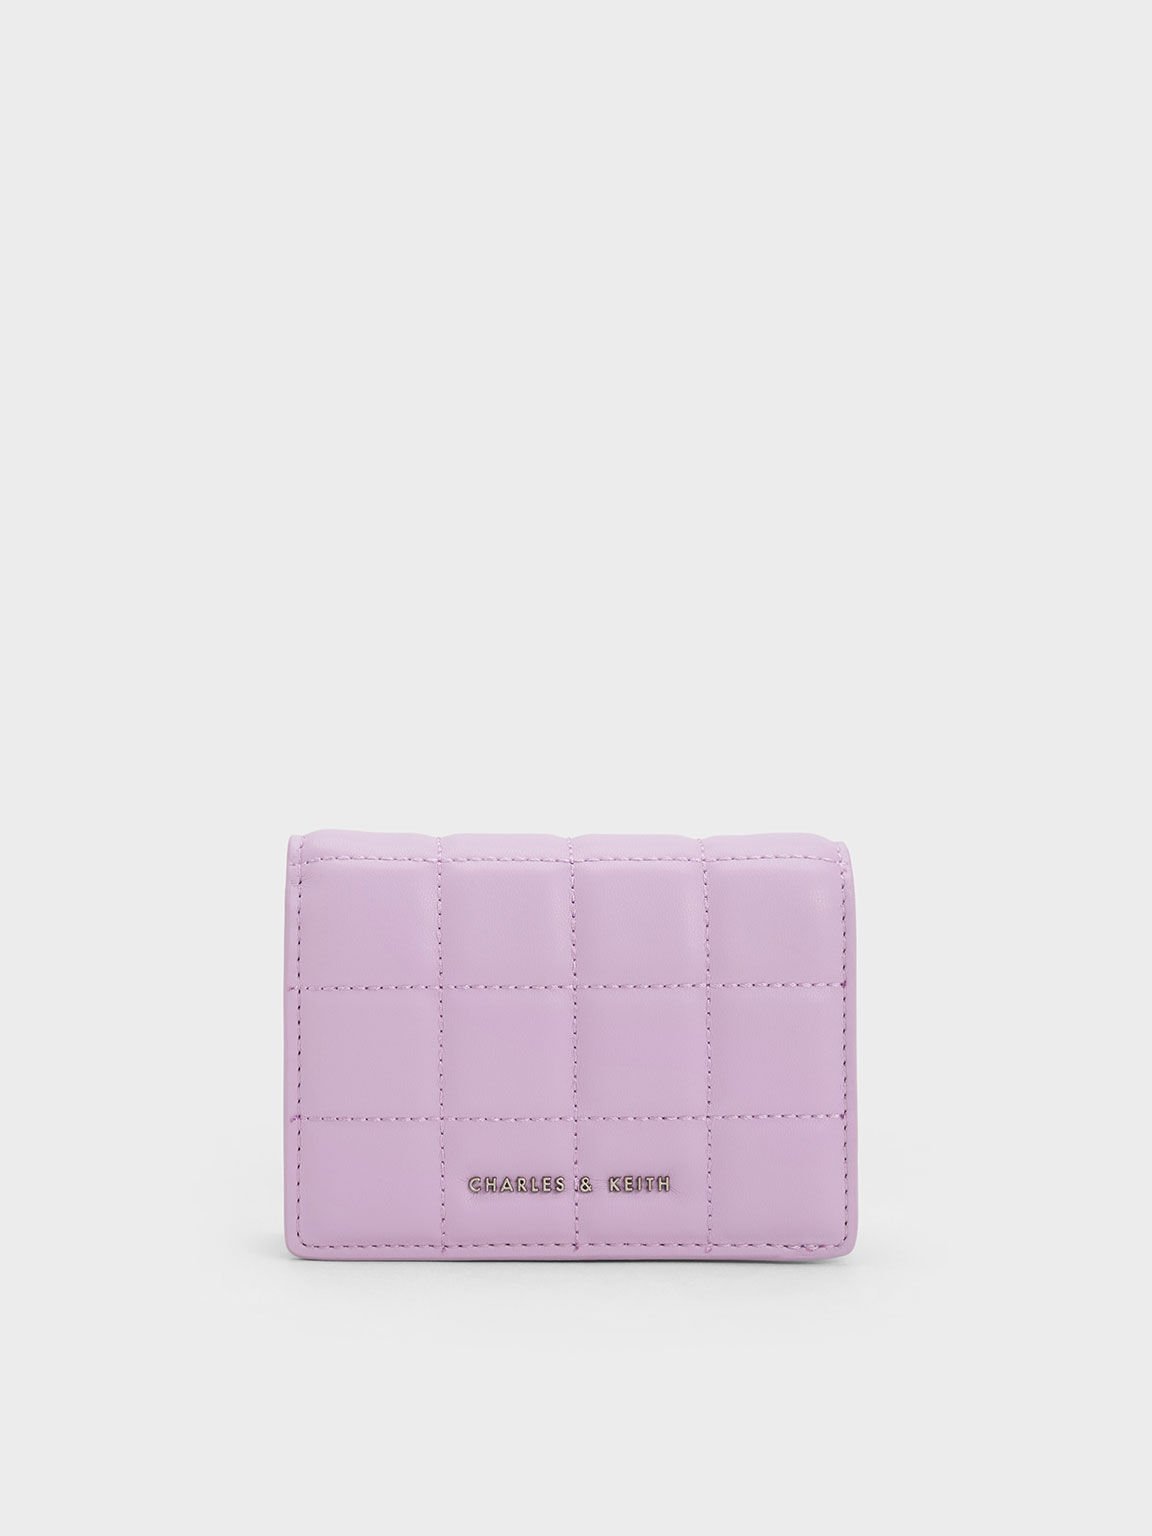 dompet Charles and keith